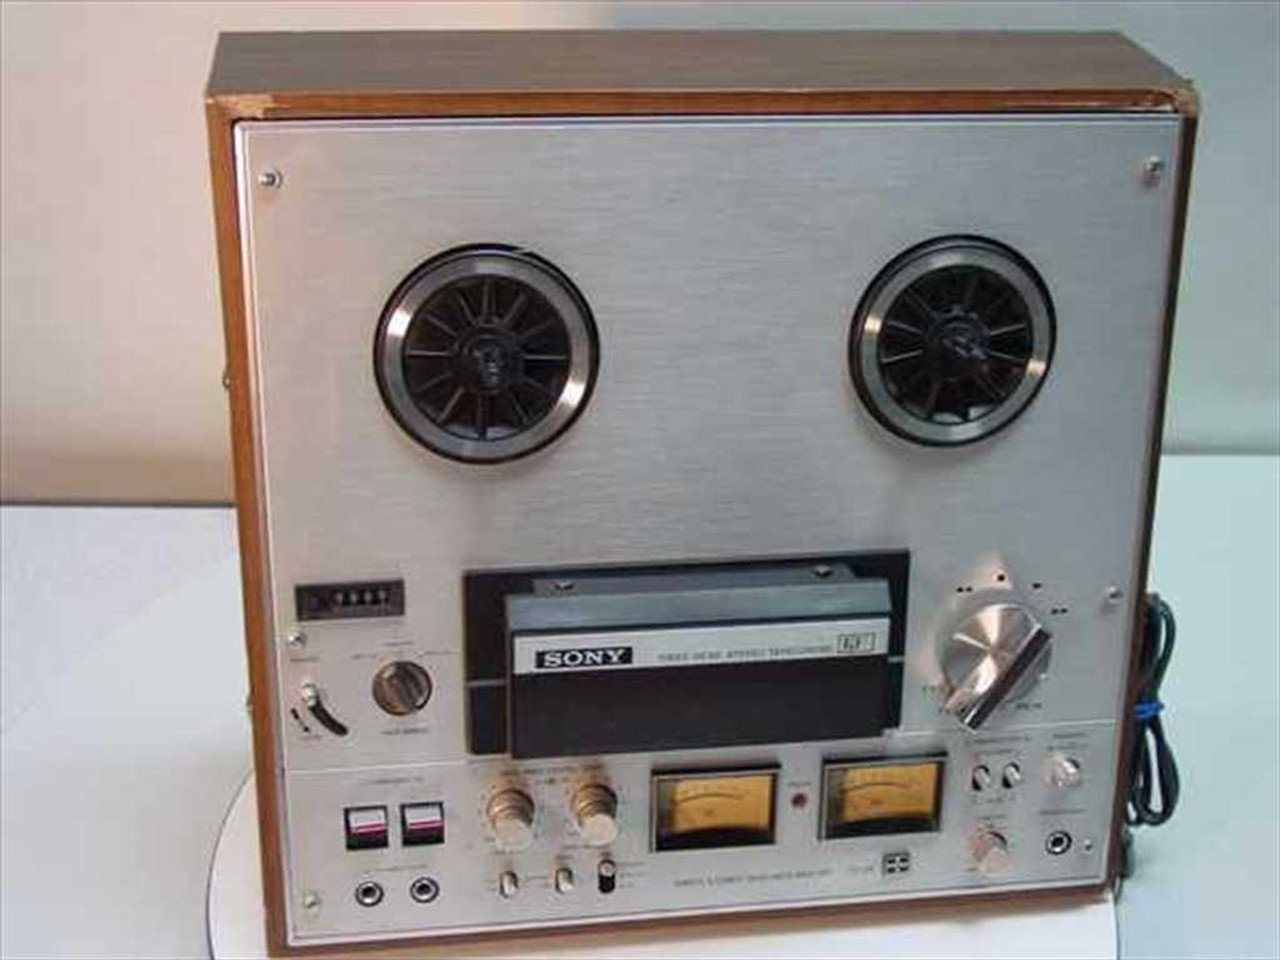 https://cdn11.bigcommerce.com/s-a1x7hg2jgk/images/stencil/1280x1280/products/31891/392623/Sony-TC-378-Stereo-Reel-to-Reel-Tape-Recorder_169018__53625.1708241073.jpg?c=2